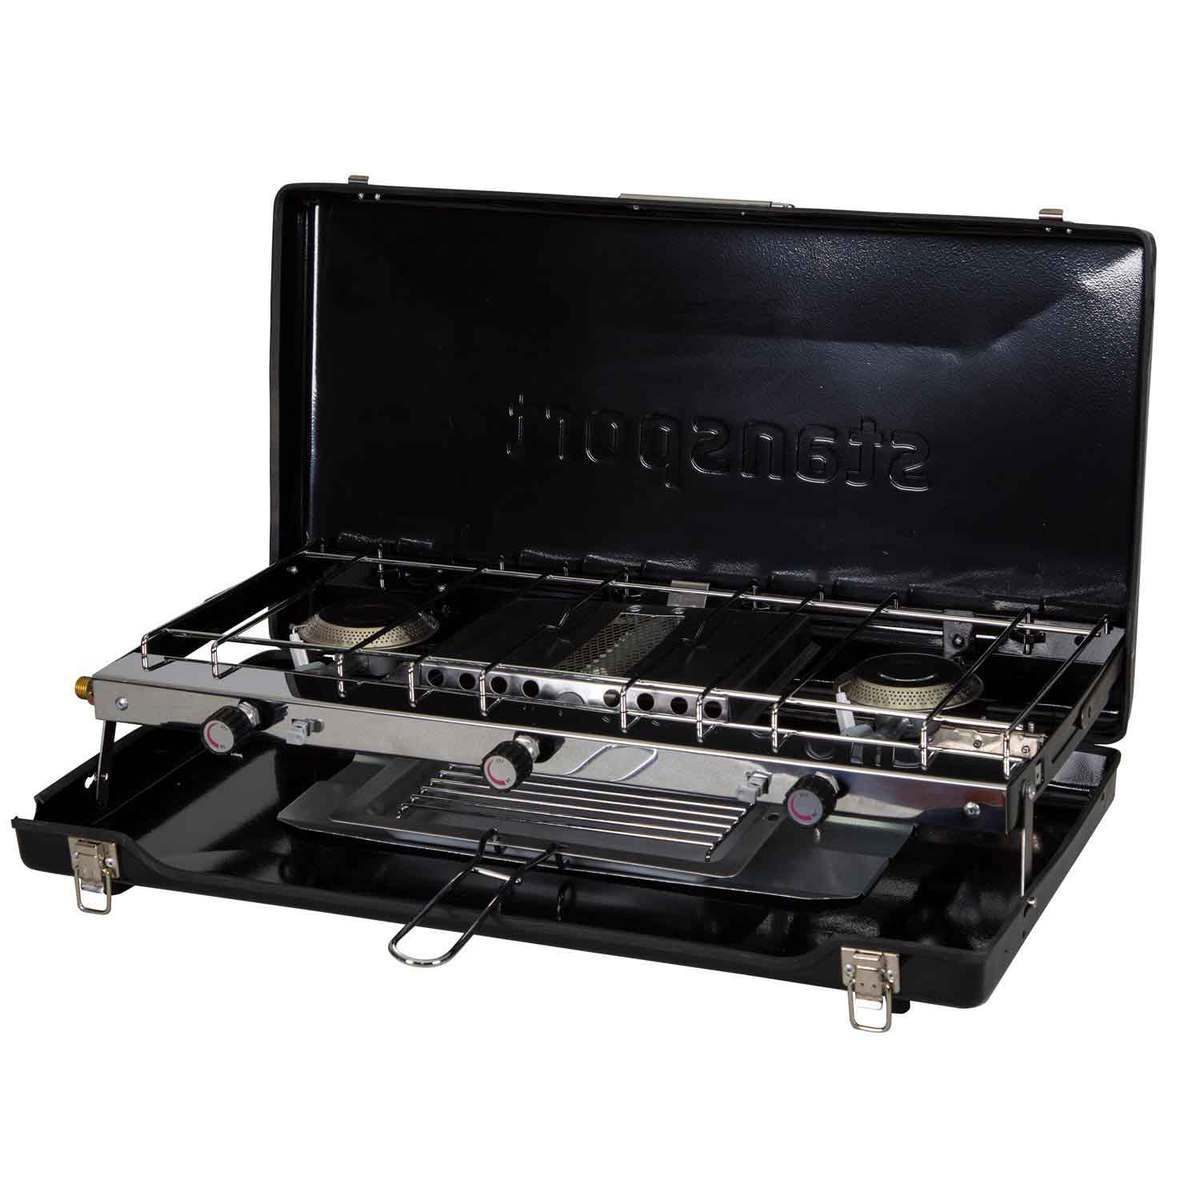 2-Burner Propane Stove with Grill - Stansport